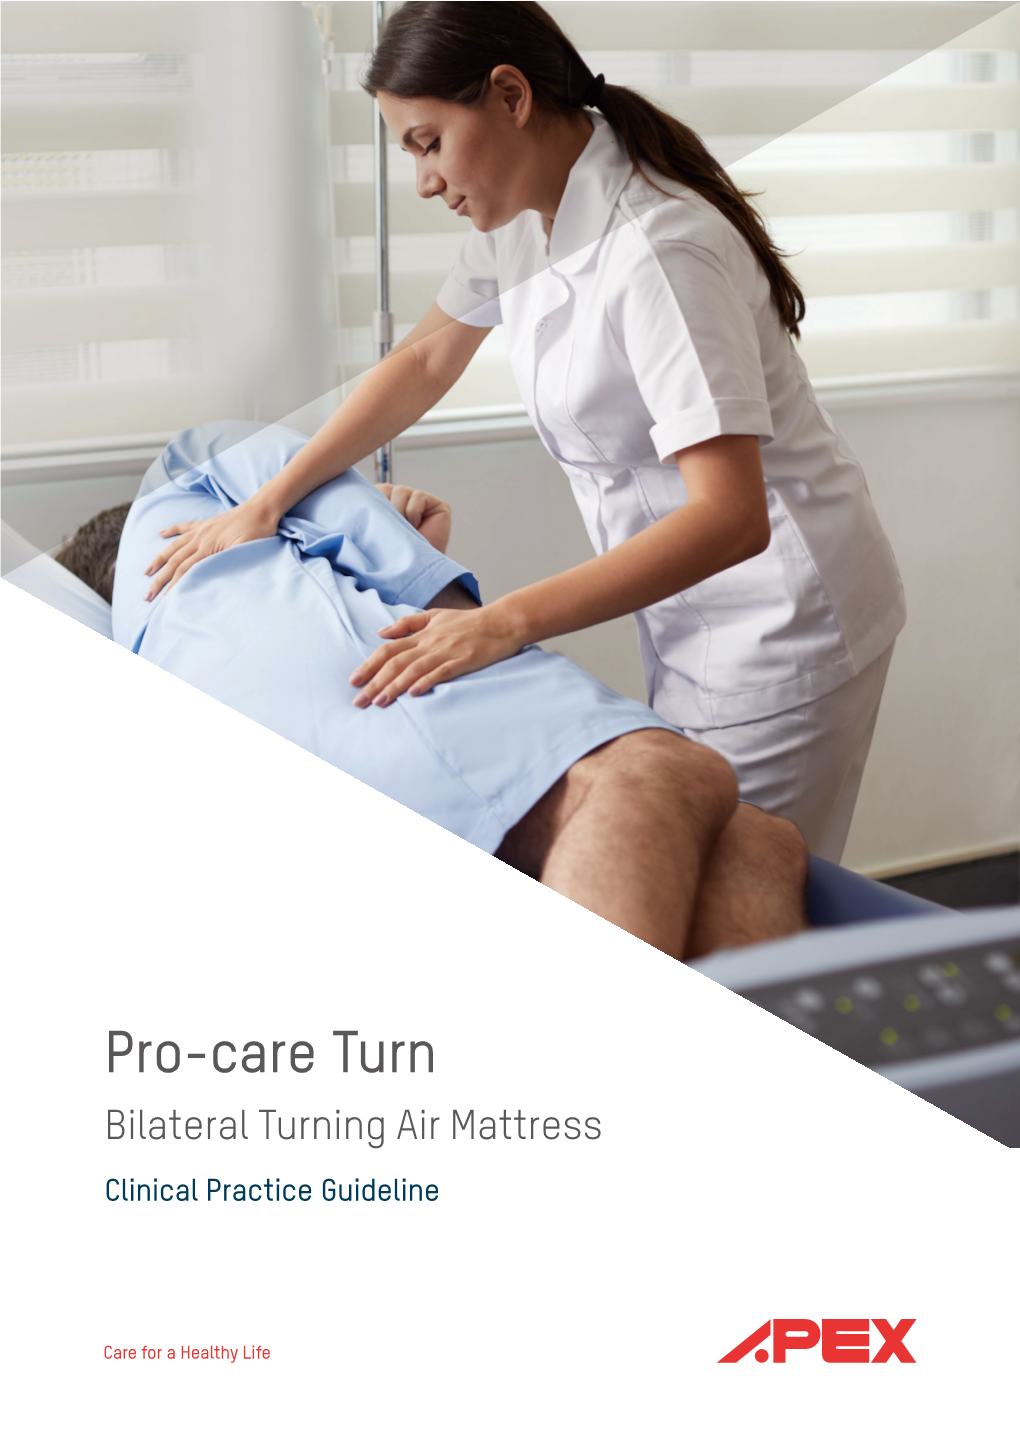 Pro-Care Turn Bilateral Turning Air Mattress Clinical Practice Guideline 2 Apex Medical Corp